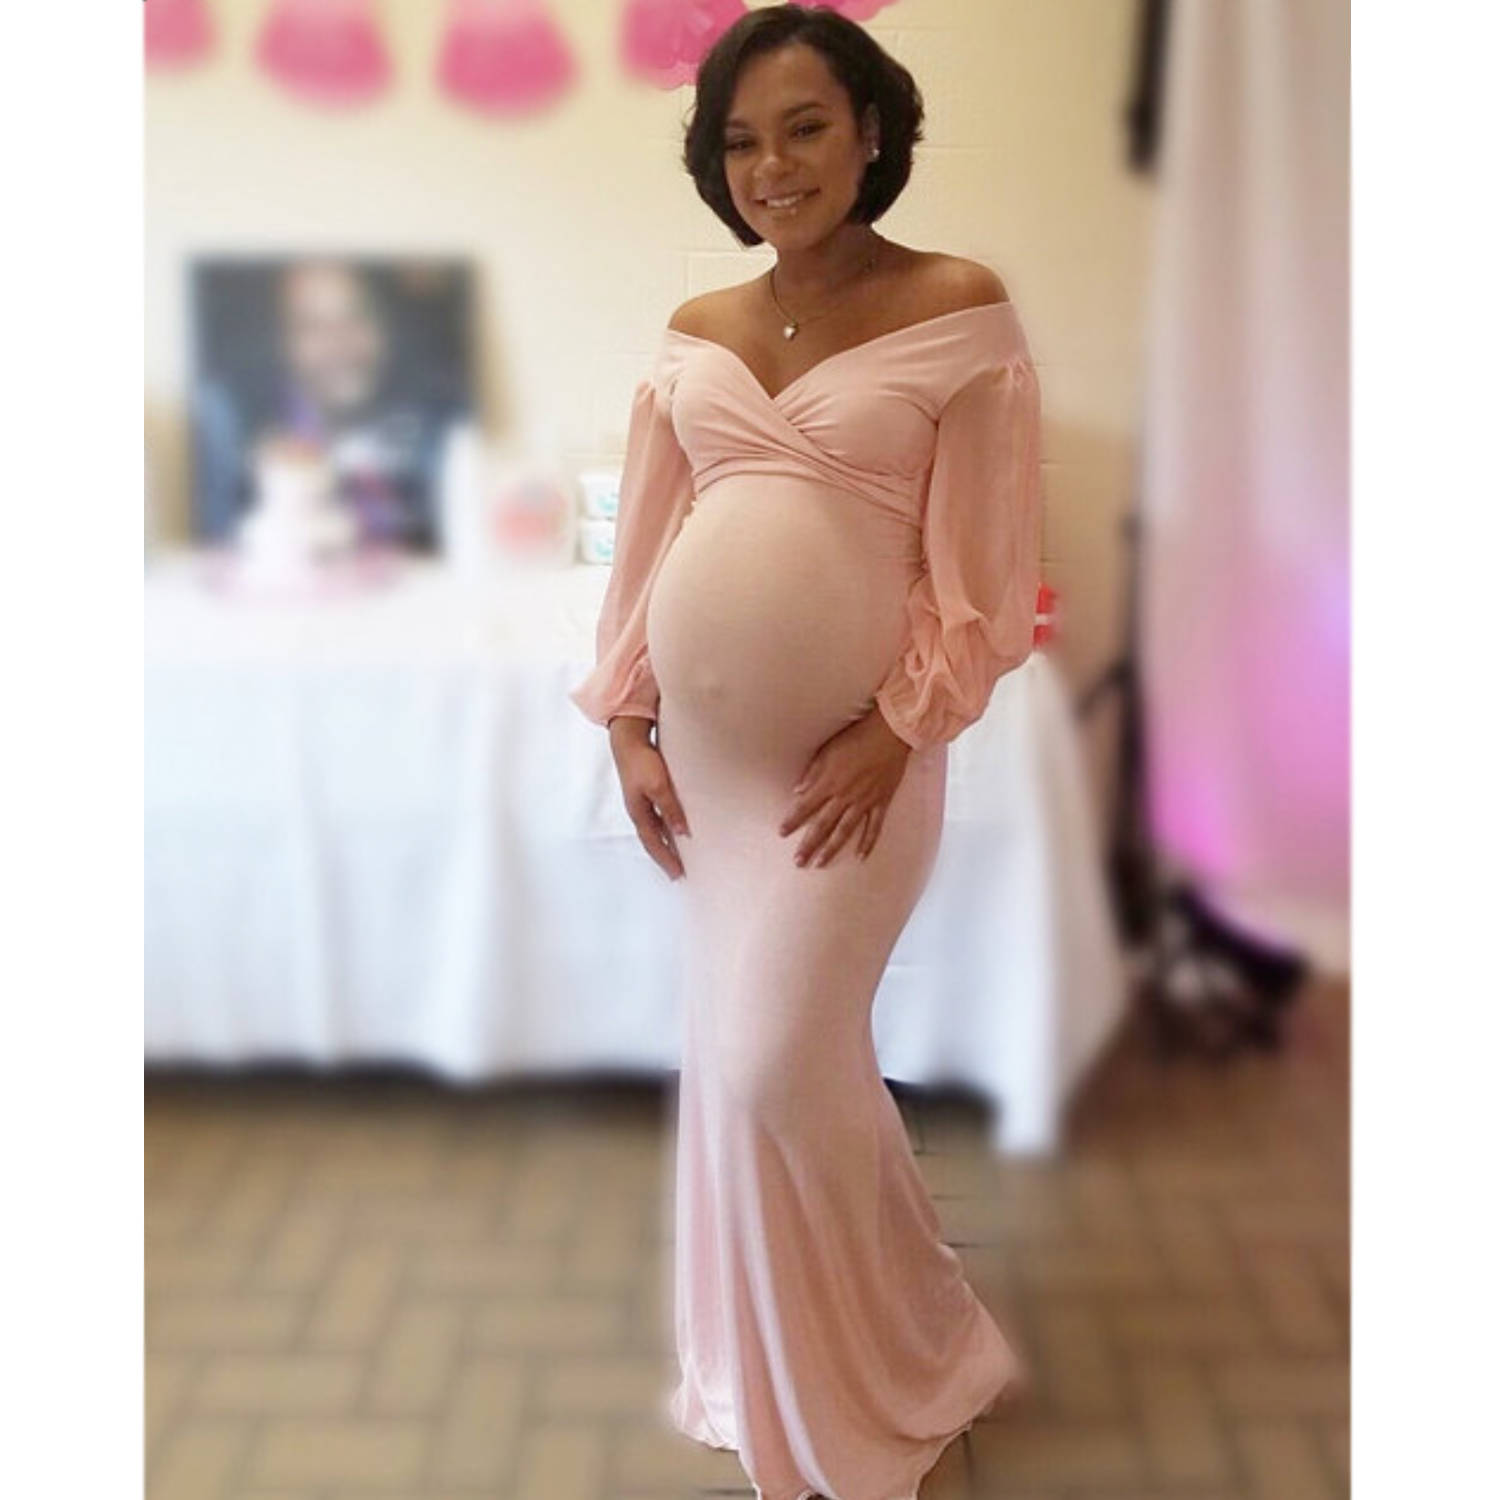 Full Size of Baby Shower:petite Maternity Dresses For Baby Shower Forever 21 Maternity Celebrity Baby Shower Dresses Inexpensive Maternity Clothes A Pea In The Pod Maternity Clothes Maternity Dresses Formal 2 Searches Left. What Should I Wear To My Baby Shower